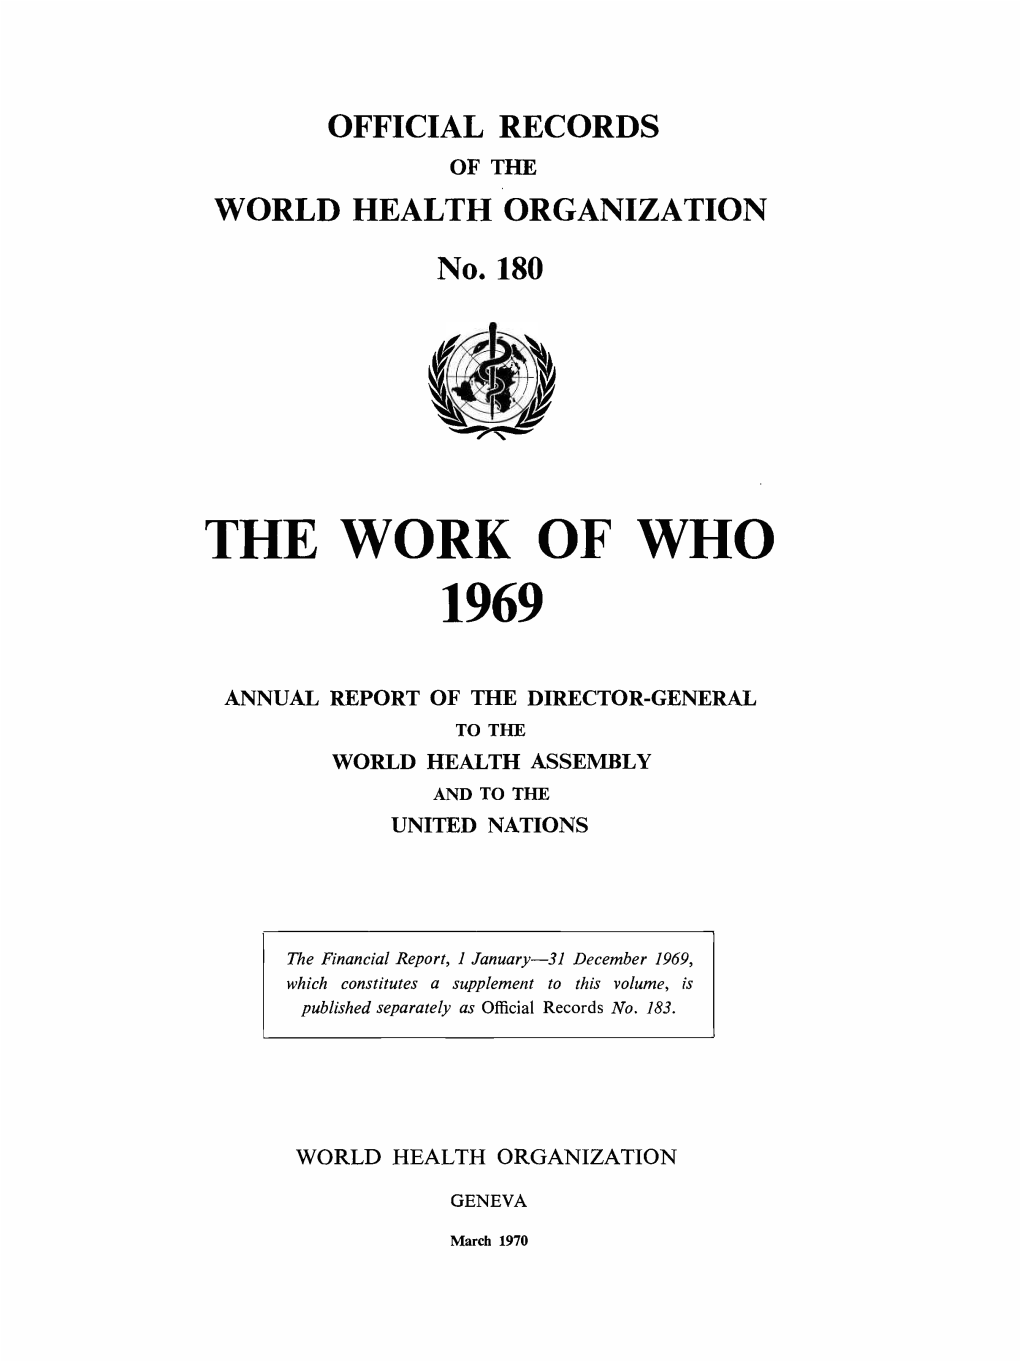 The Work of Who 1969